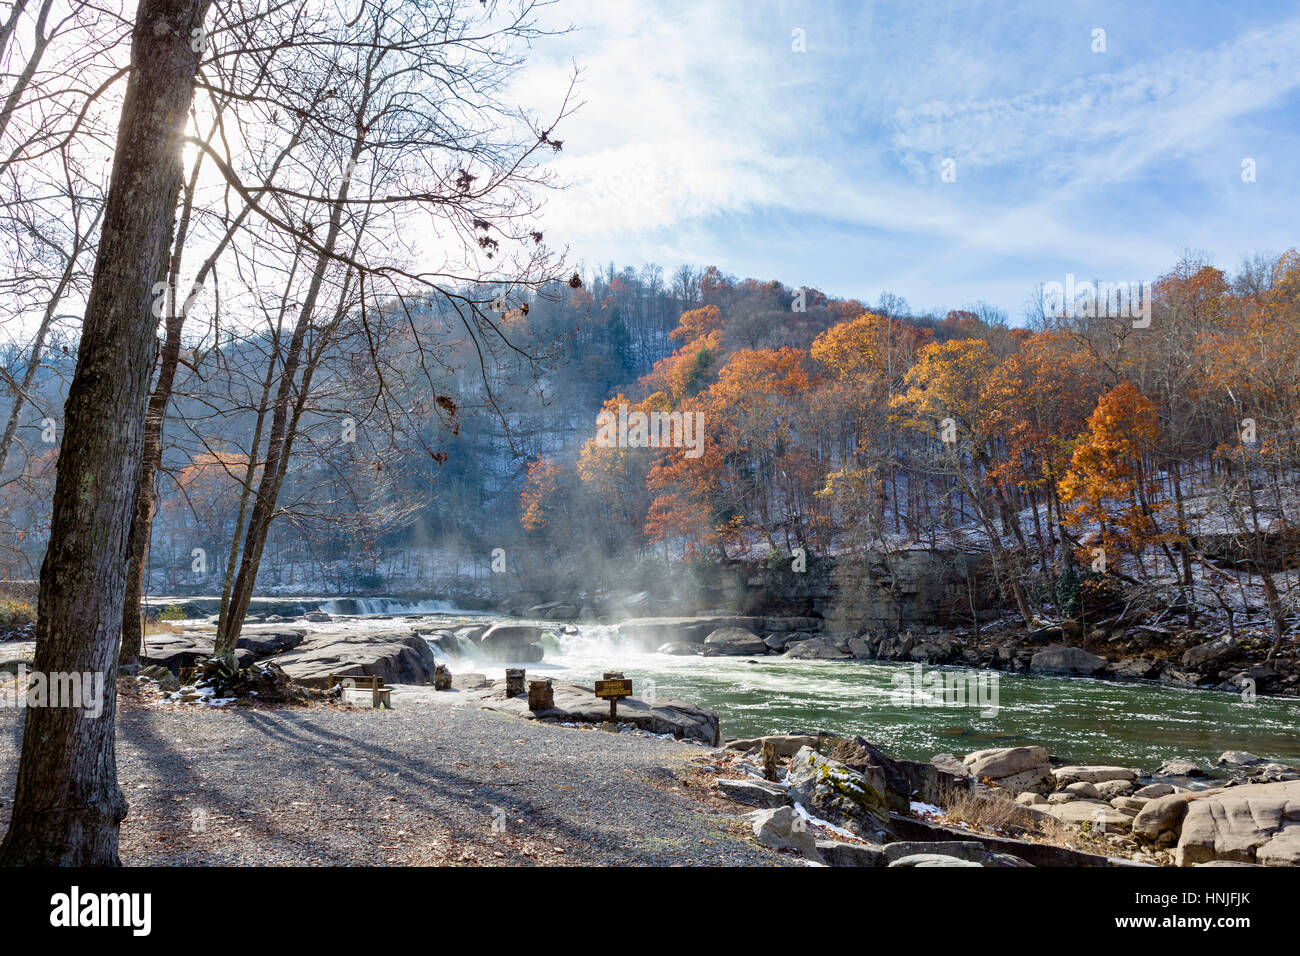 Valley Falls State Park, vicino Fairmont, West Virginia, USA Foto Stock